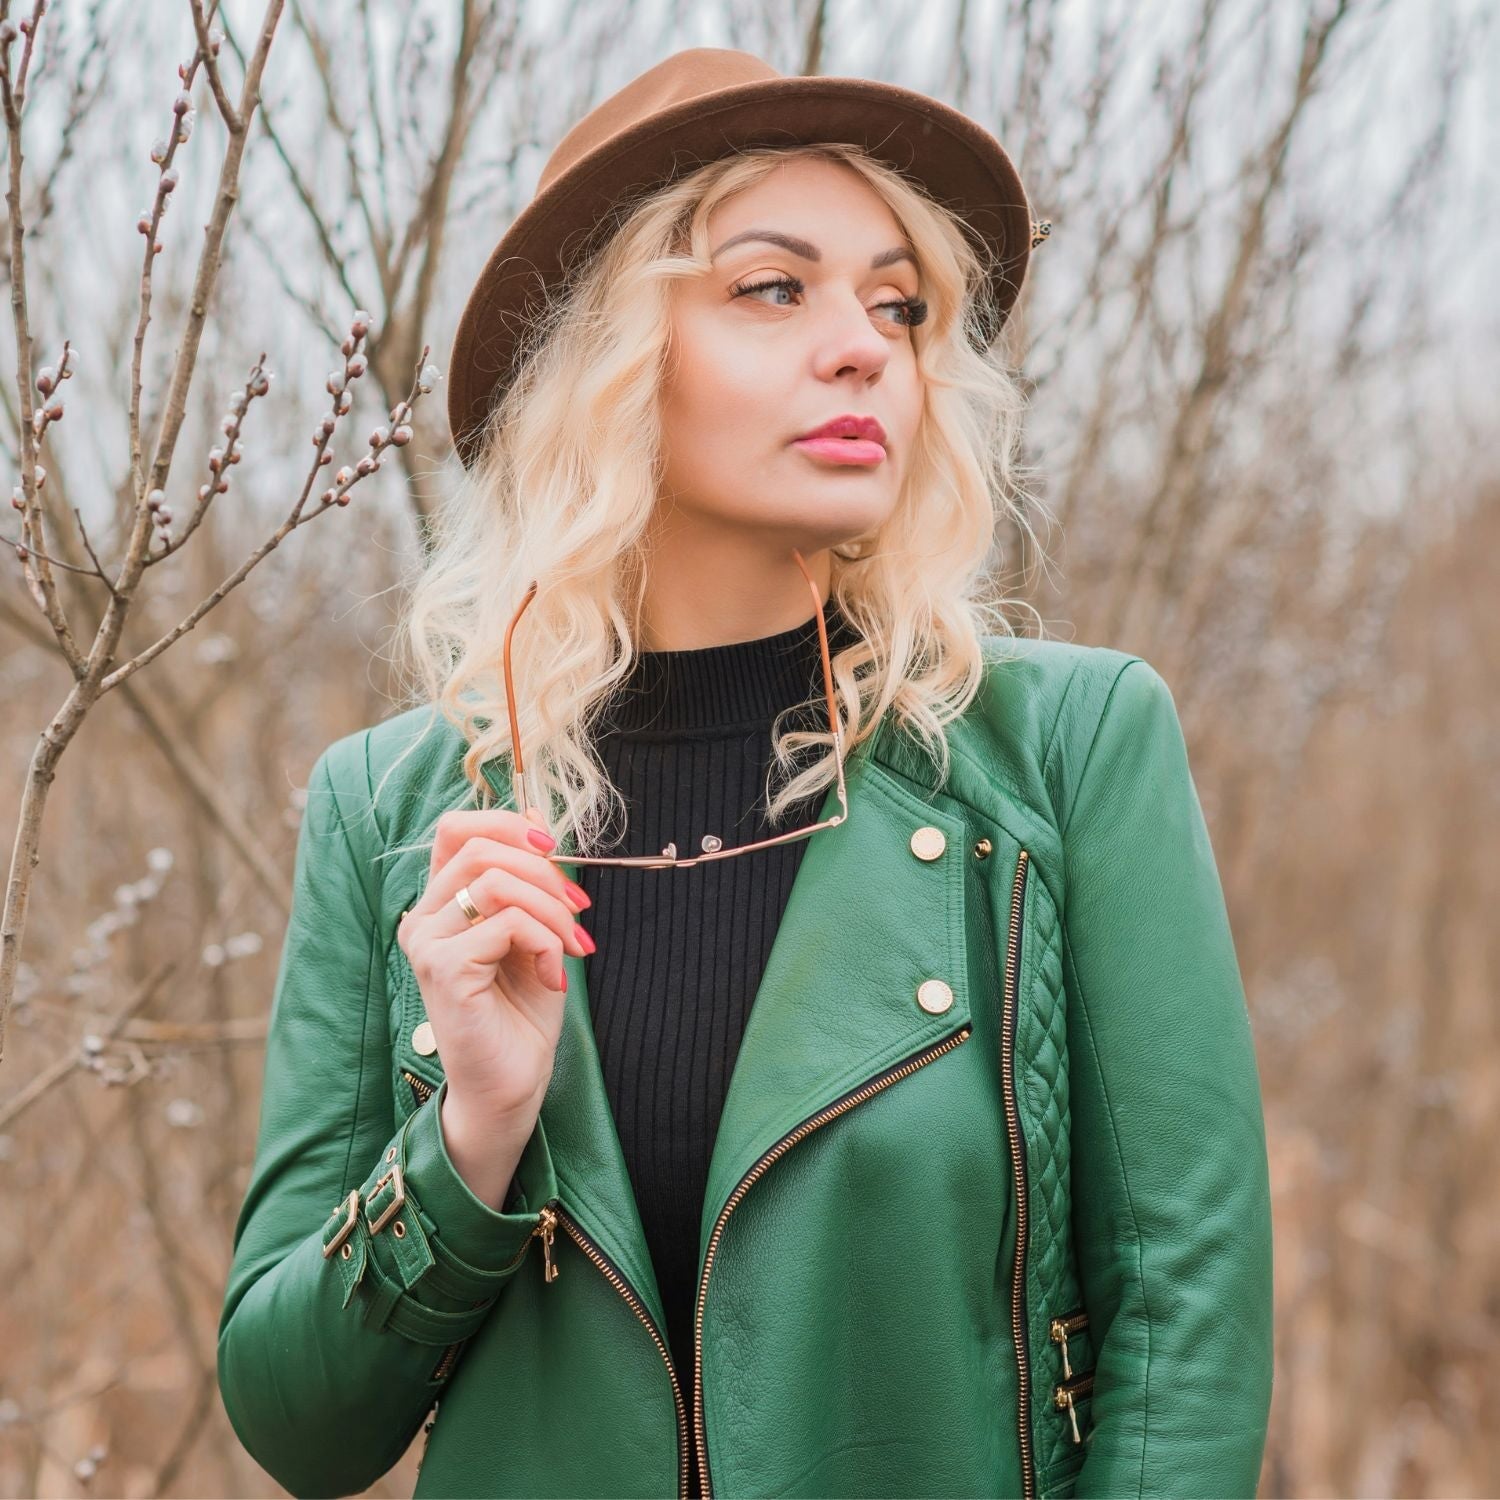 Impressive Green Leather Jacket Outfit Ideas for Women